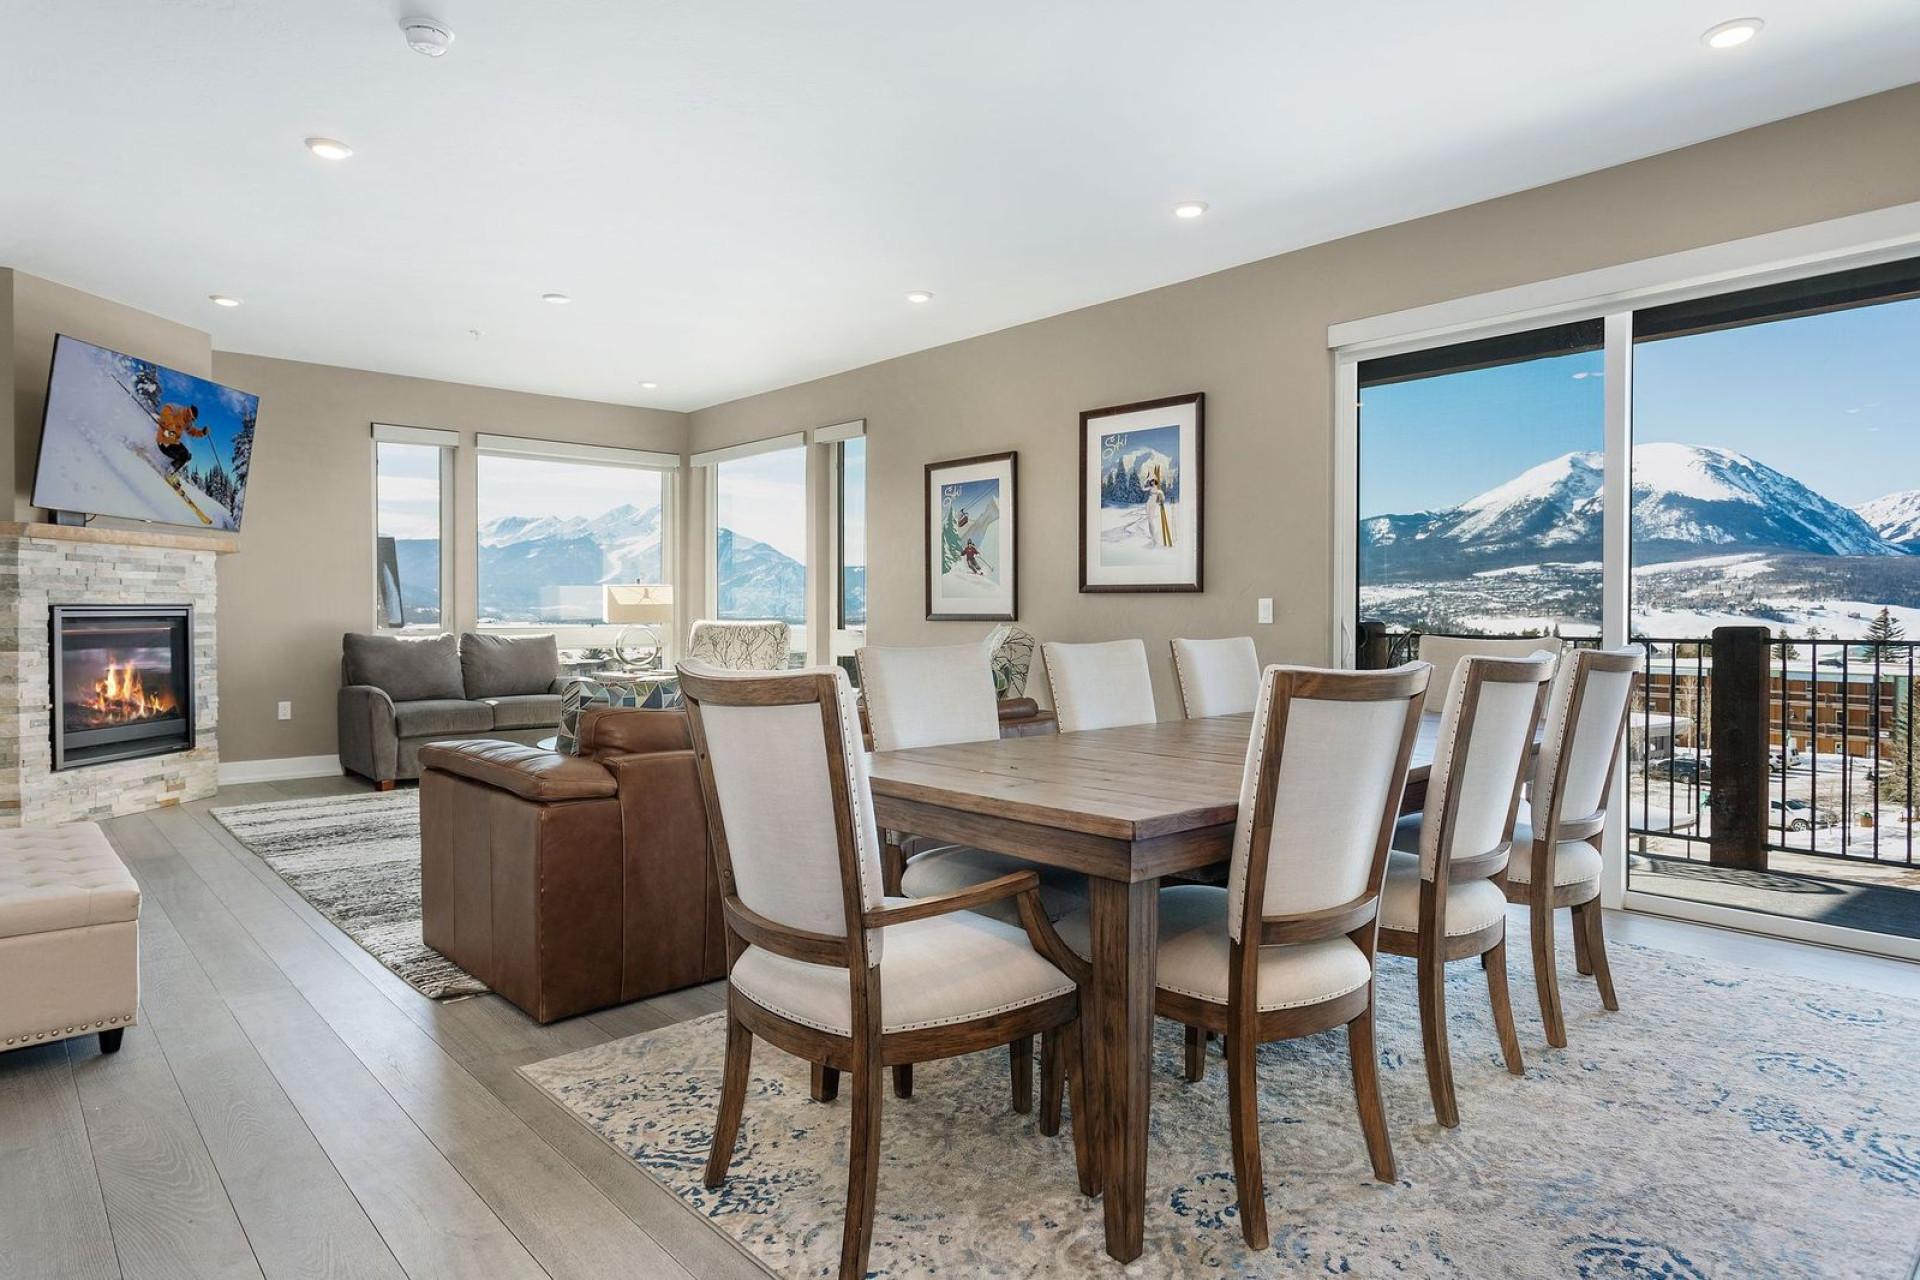 Property Image 1 - Take in Breathtaking Lake, Mountain Views from this Penthouse Condo While Staying Central to Skiing!